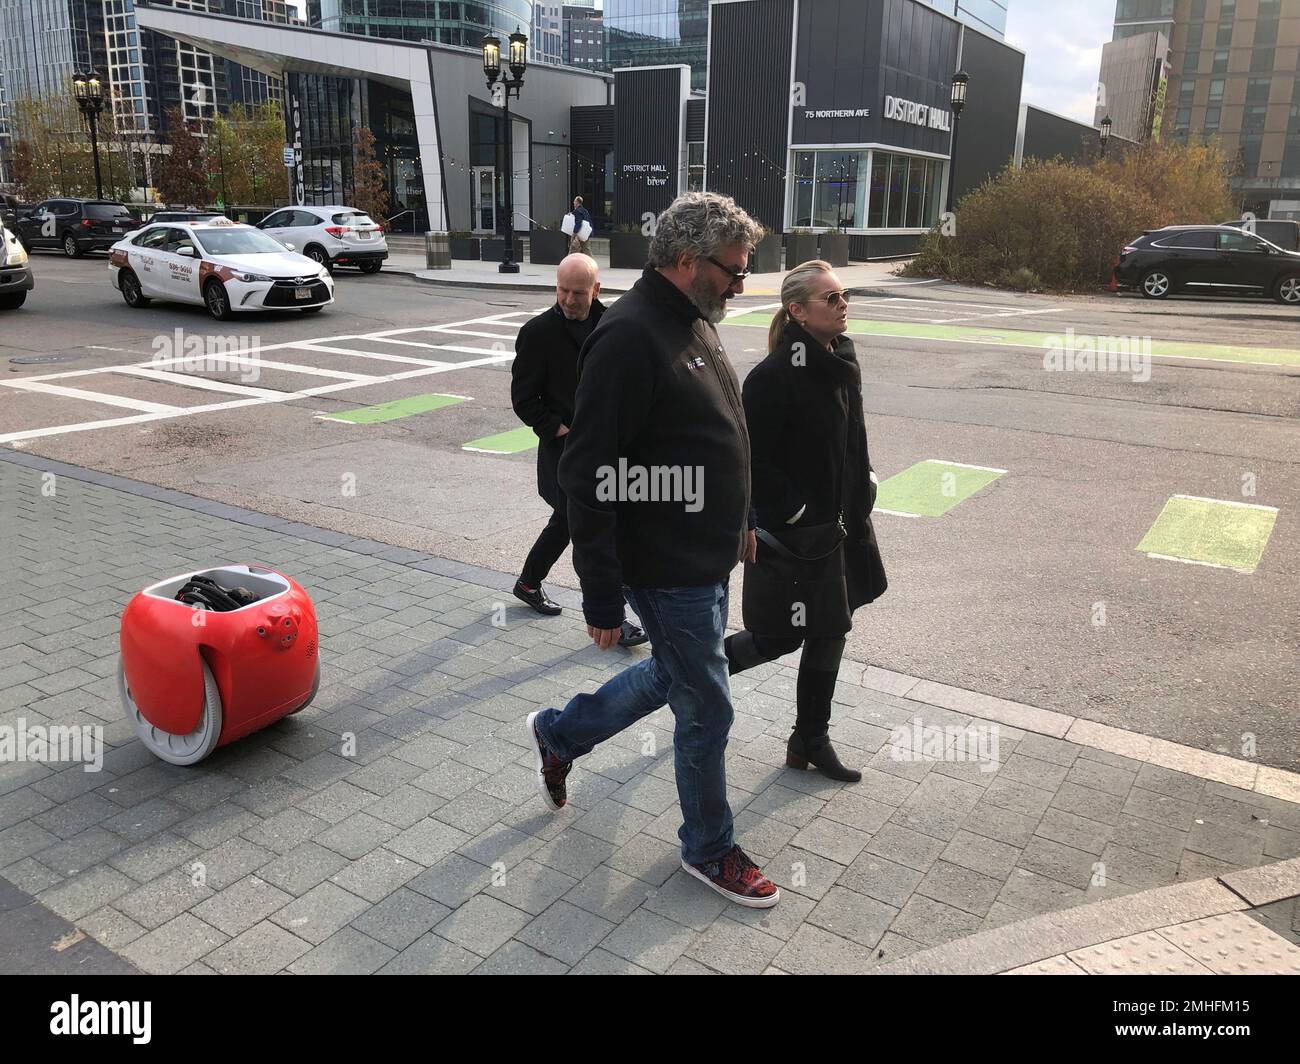 Piaggio Fast Forward CEO Greg Lynn, center, is followed by his company's  Gita carrier robot as he crosses a street on Monday, Nov. 11, in Boston.  The two-wheeled machine is carrying a